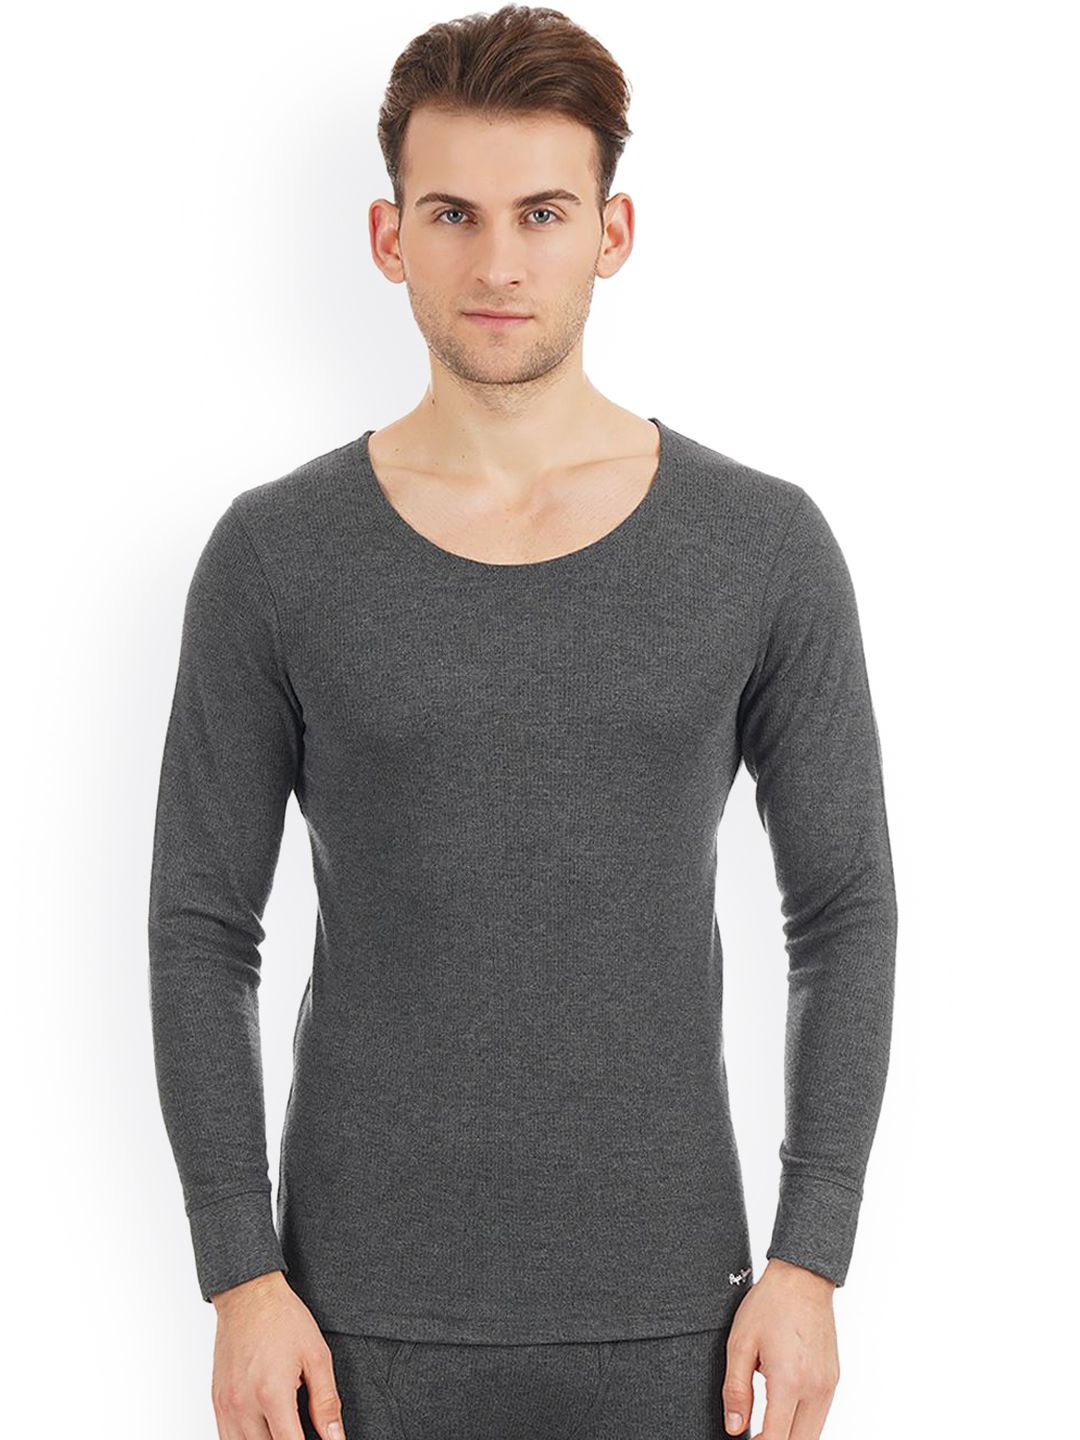 Pepe Jeans Men Charcoal Grey Solid Thermal Top Price in India